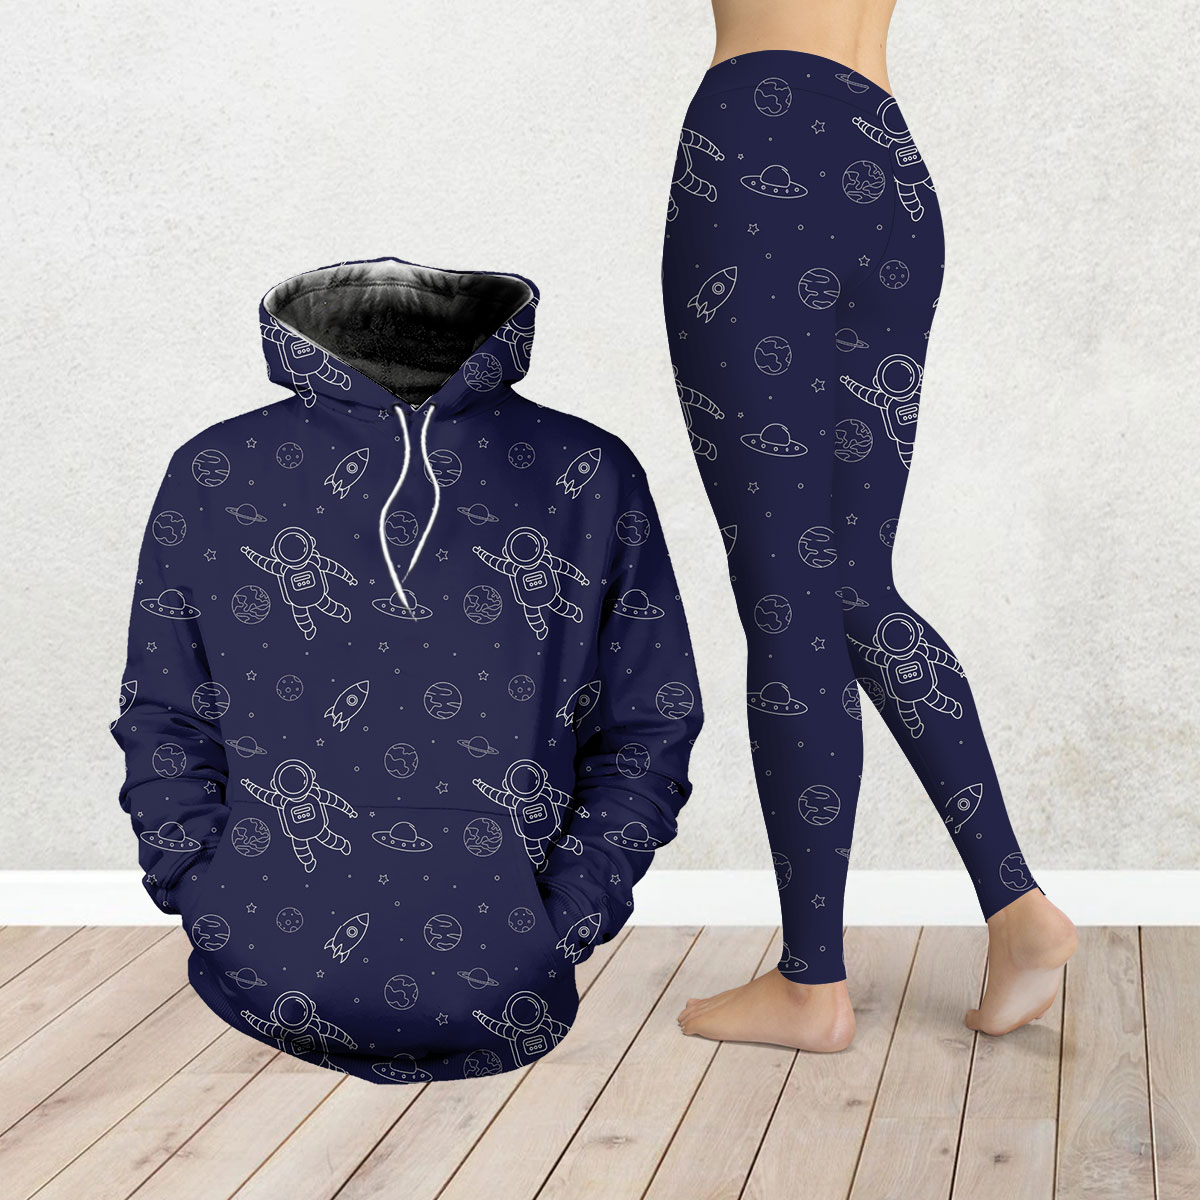 Astronaut And Outer Space Legging Hoodie Set